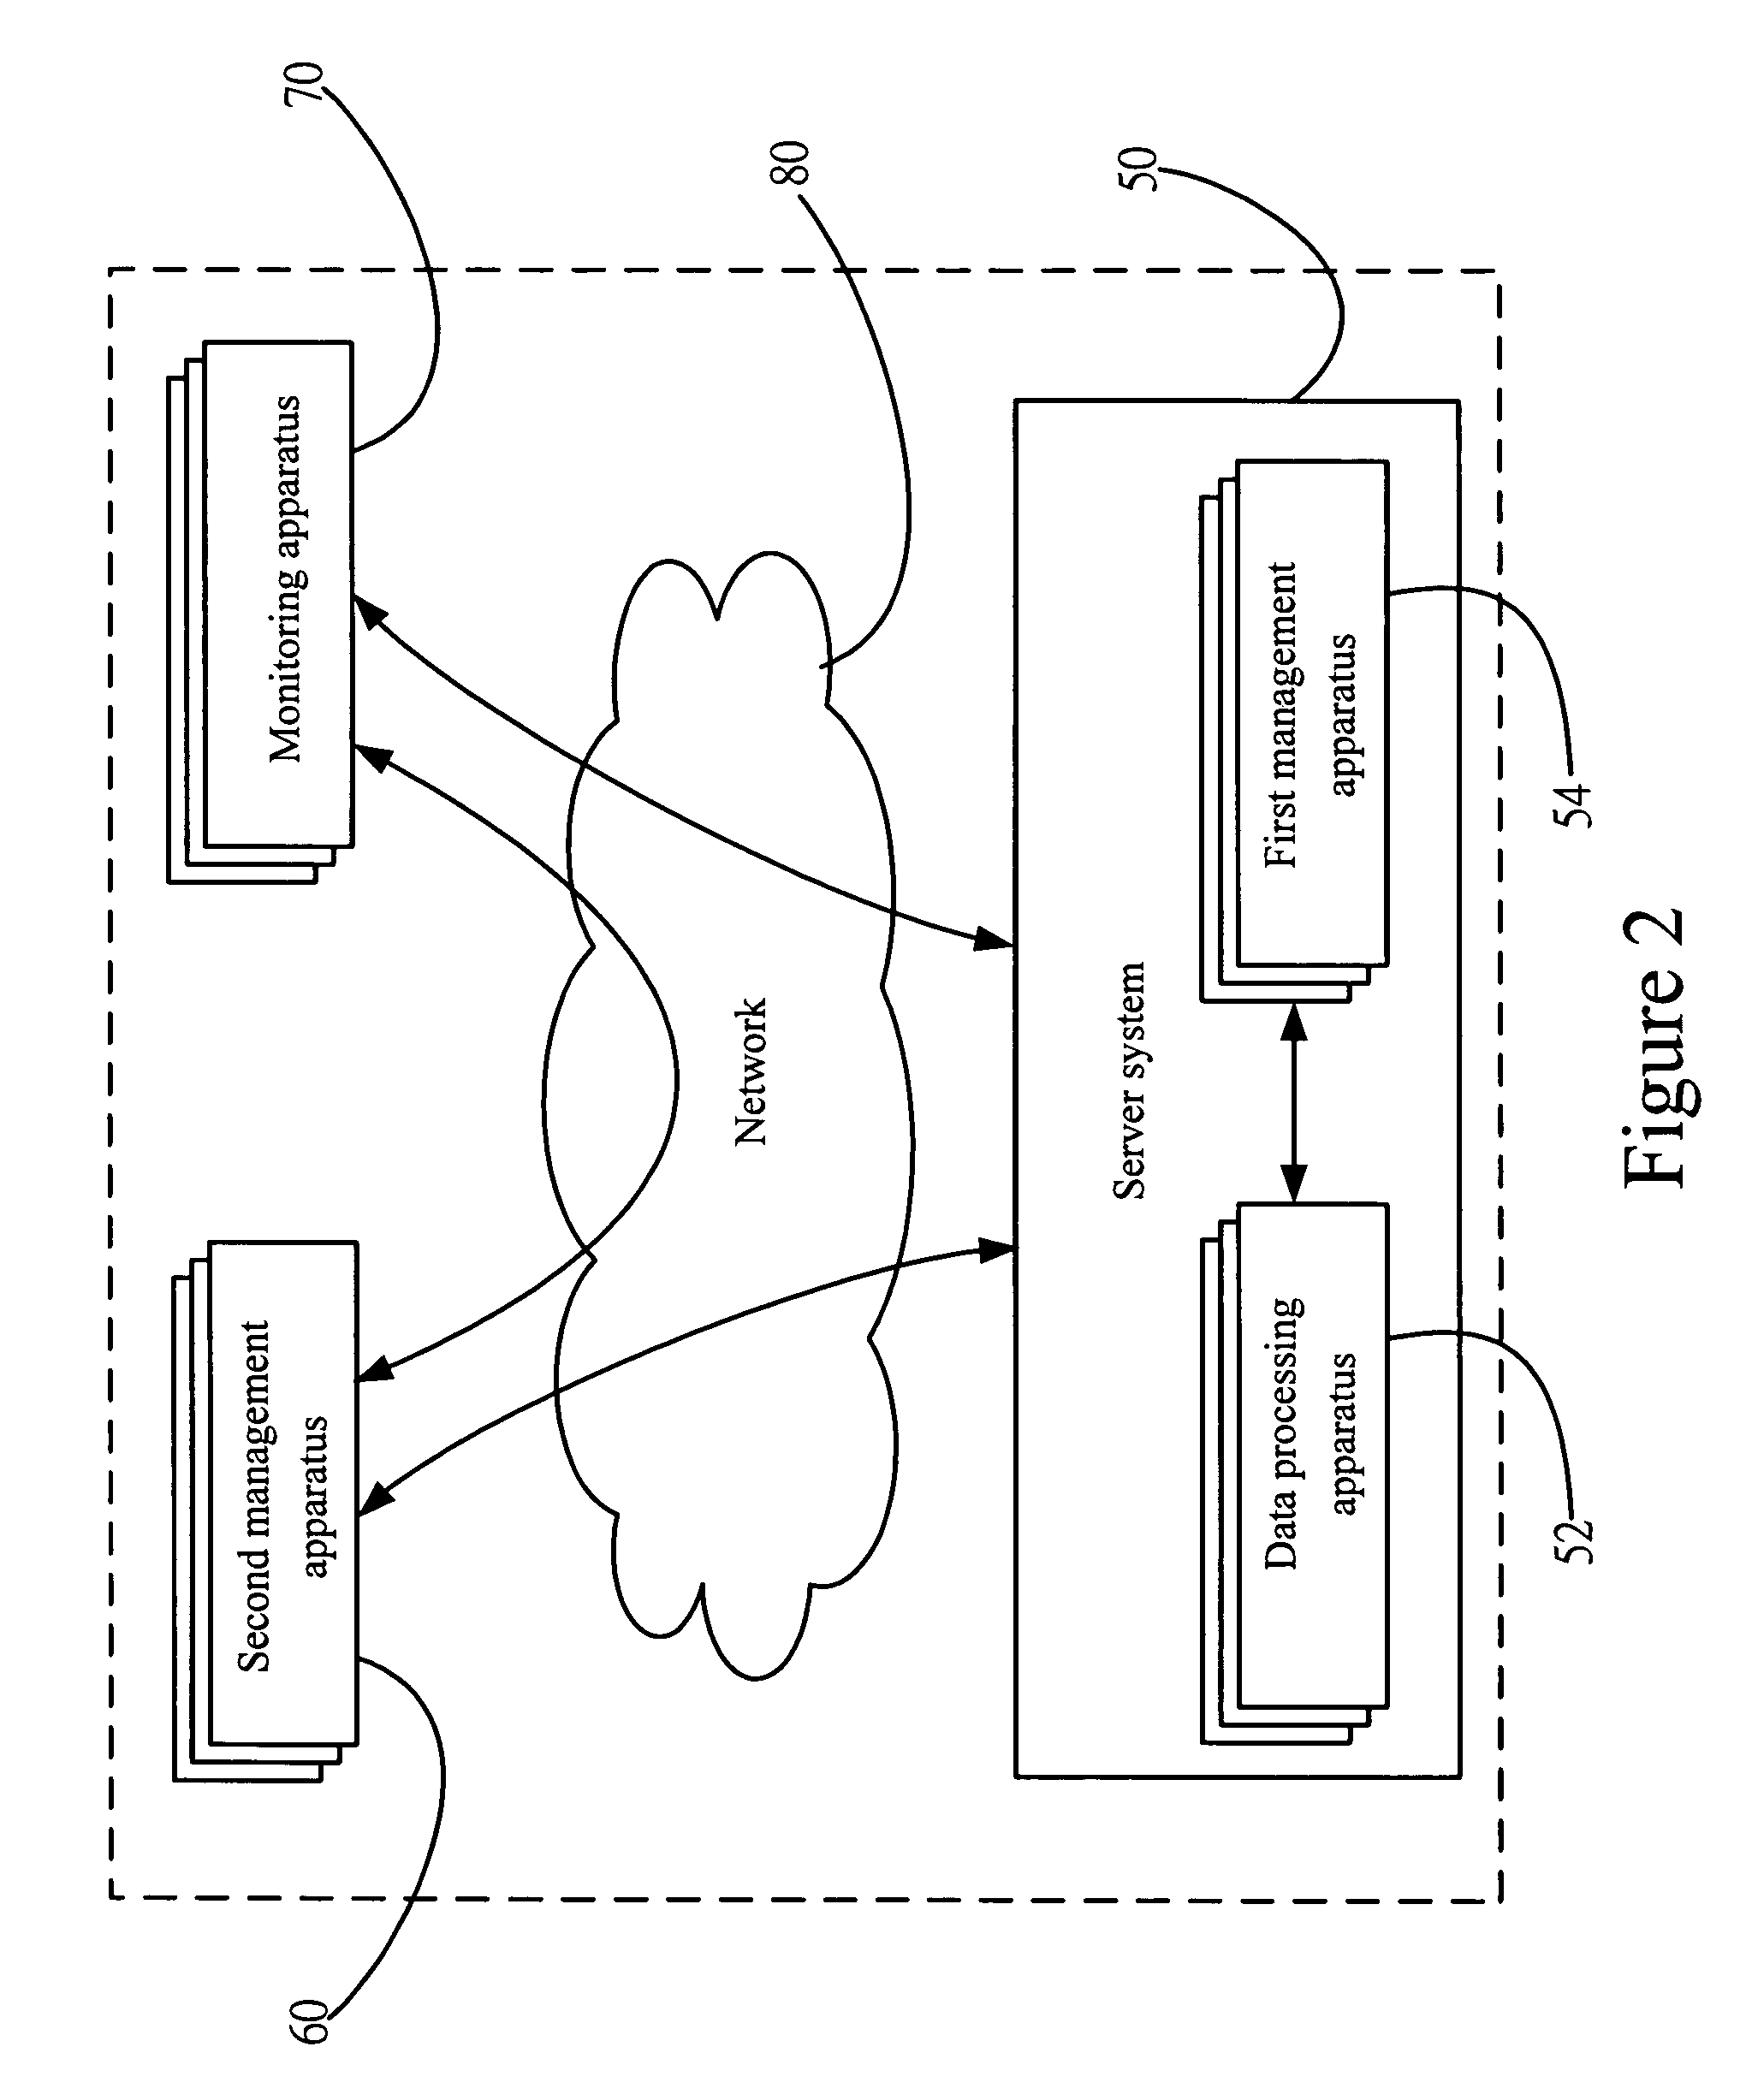 Management system with real-time interaction for environmental monitoring and method thereof